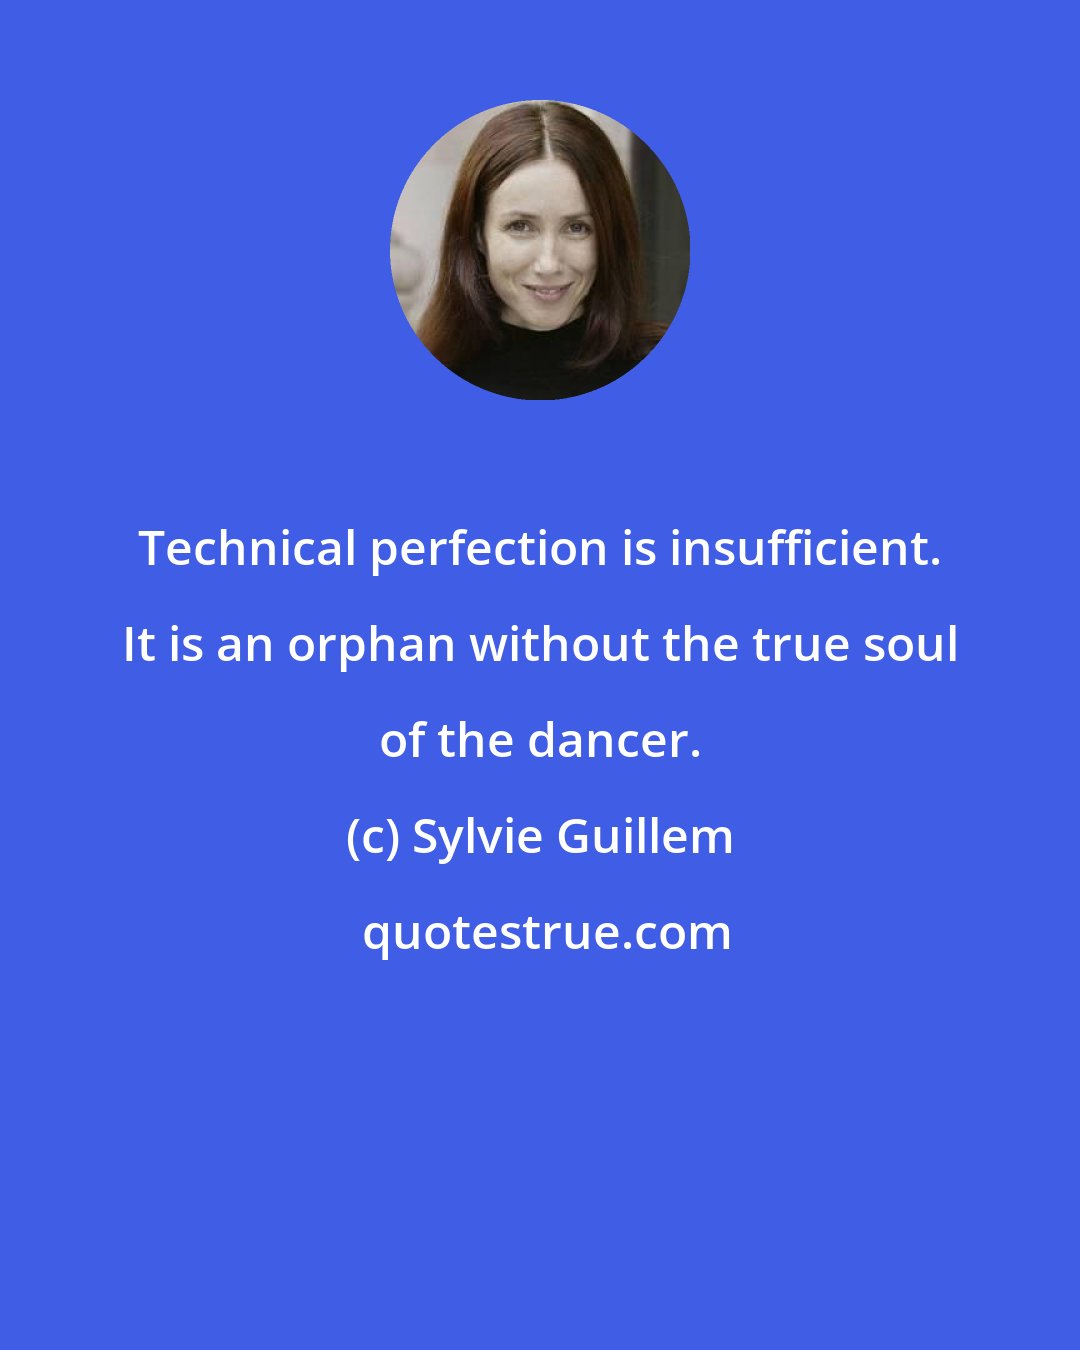 Sylvie Guillem: Technical perfection is insufficient. It is an orphan without the true soul of the dancer.